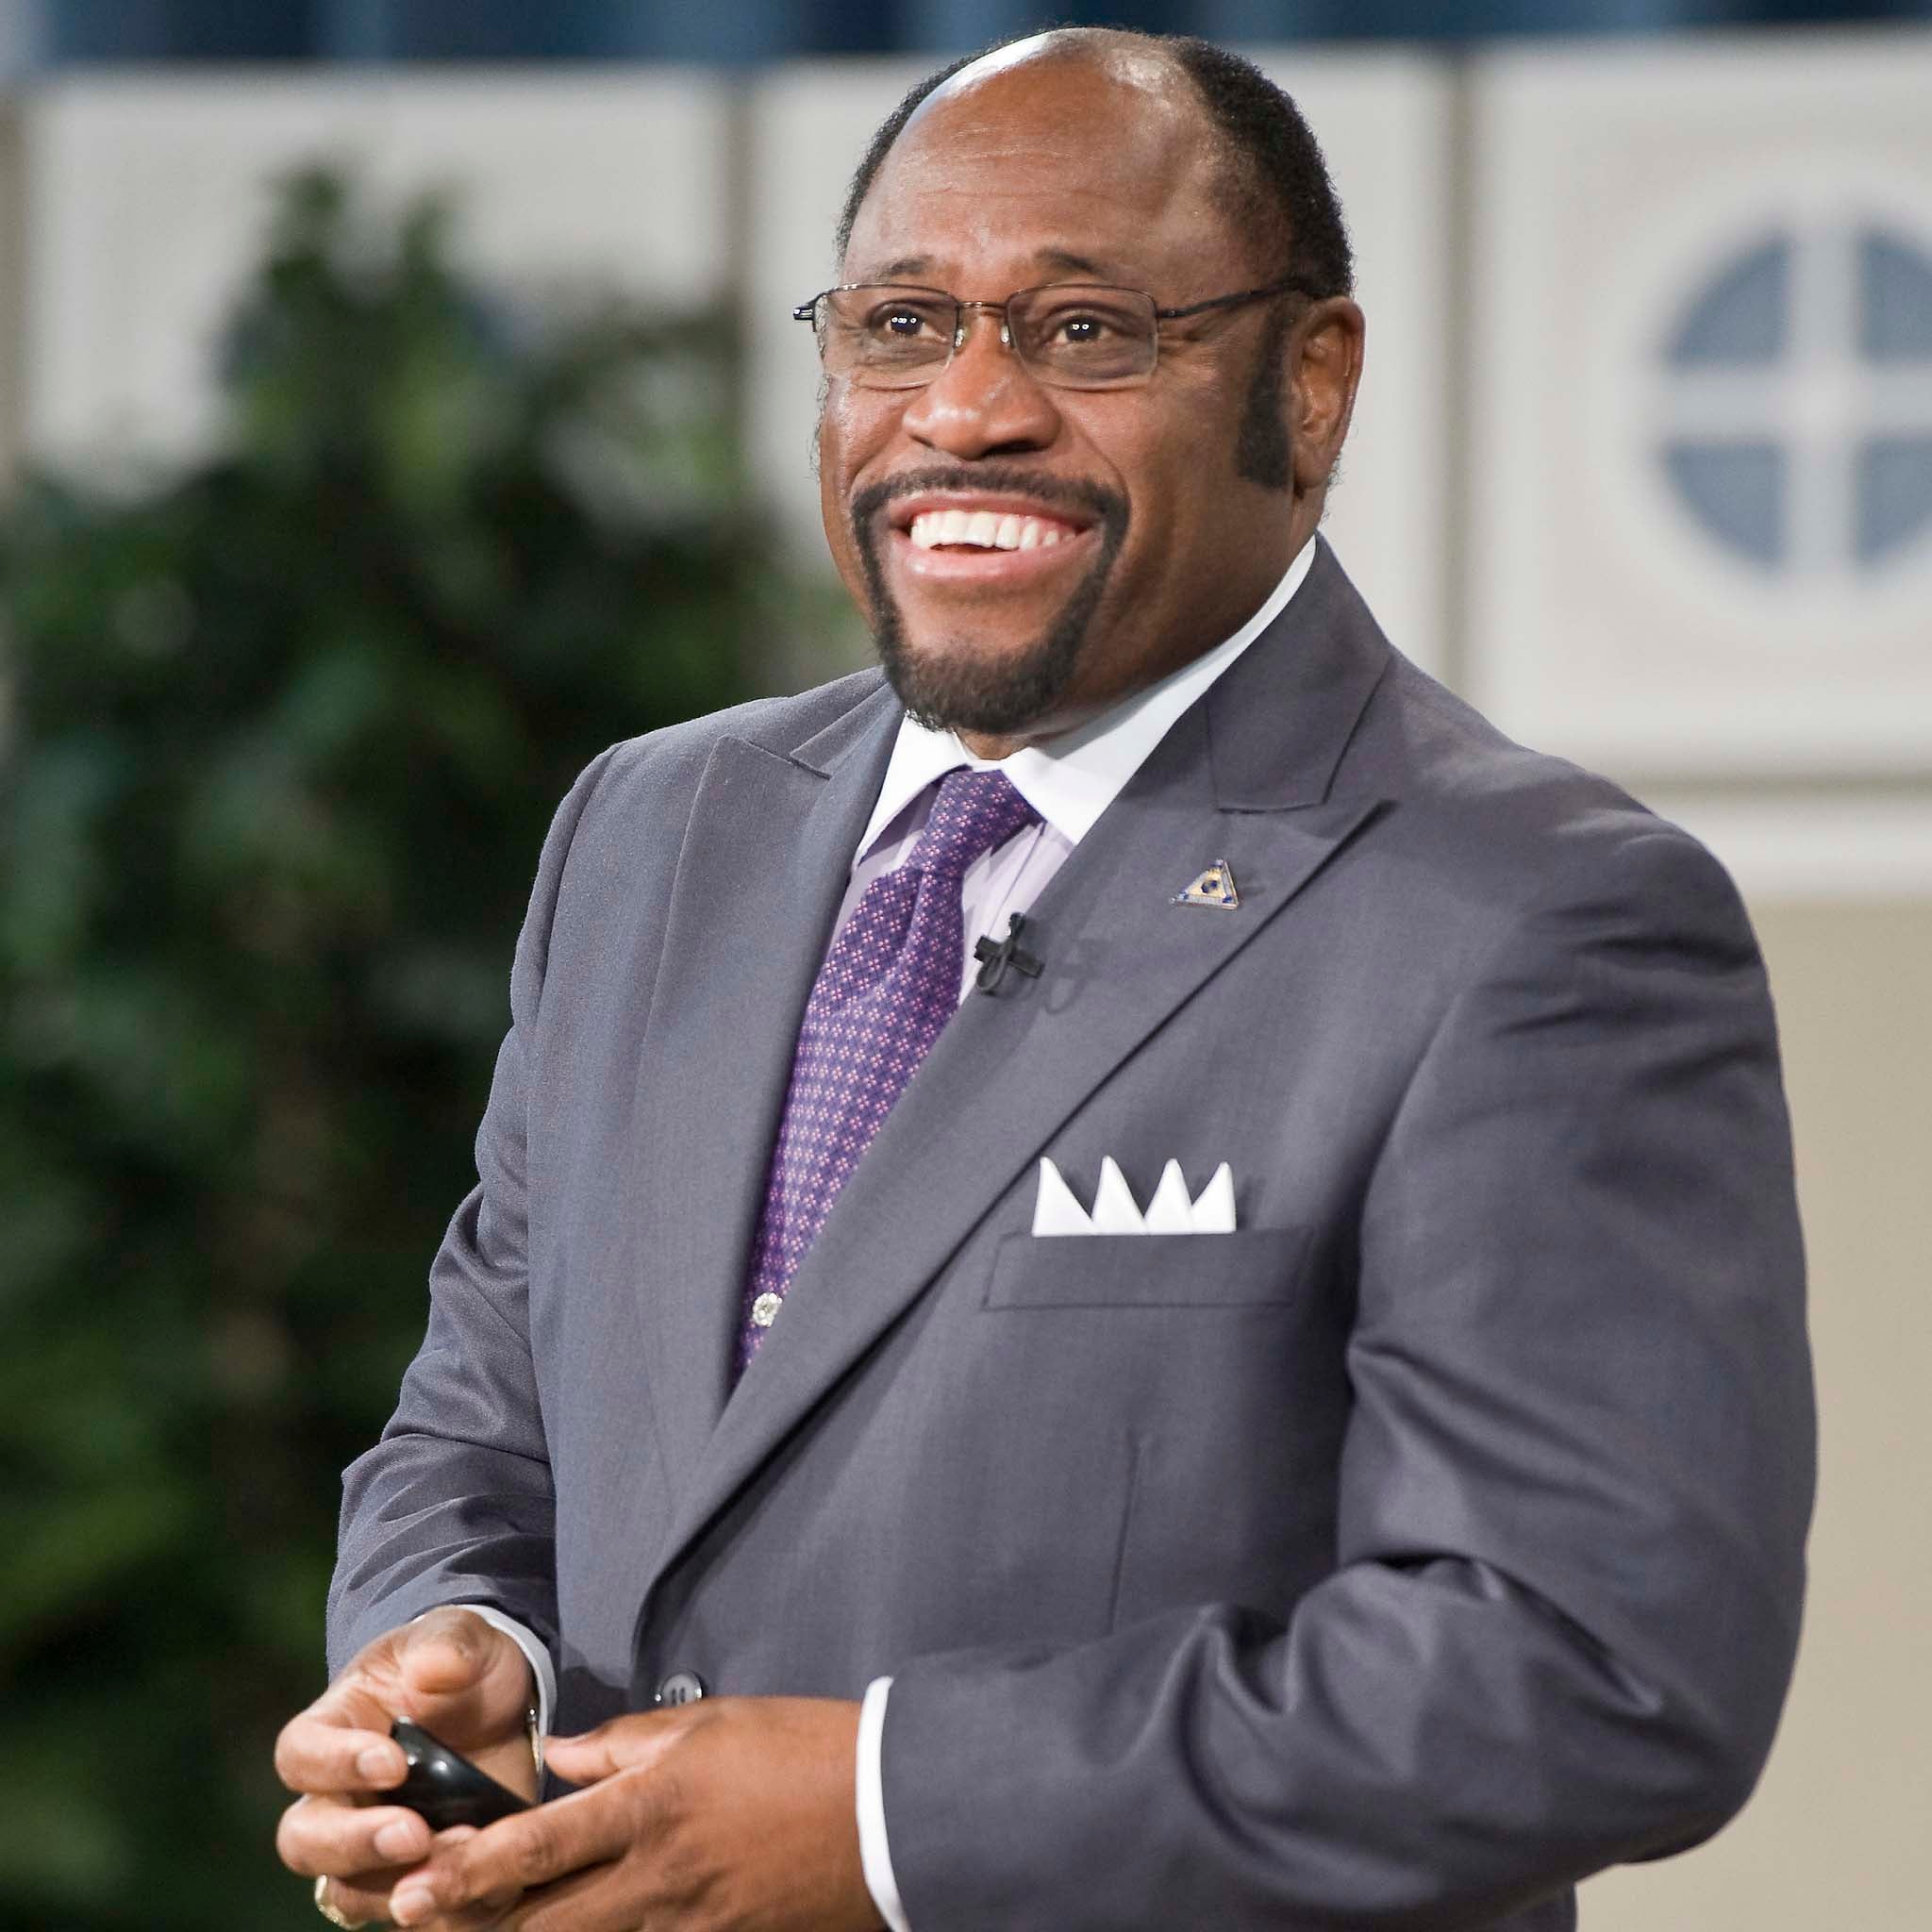 Rev. Myles Munroe preaches during an Oral Roberts University chapel service in Tulsa, Oklahoma